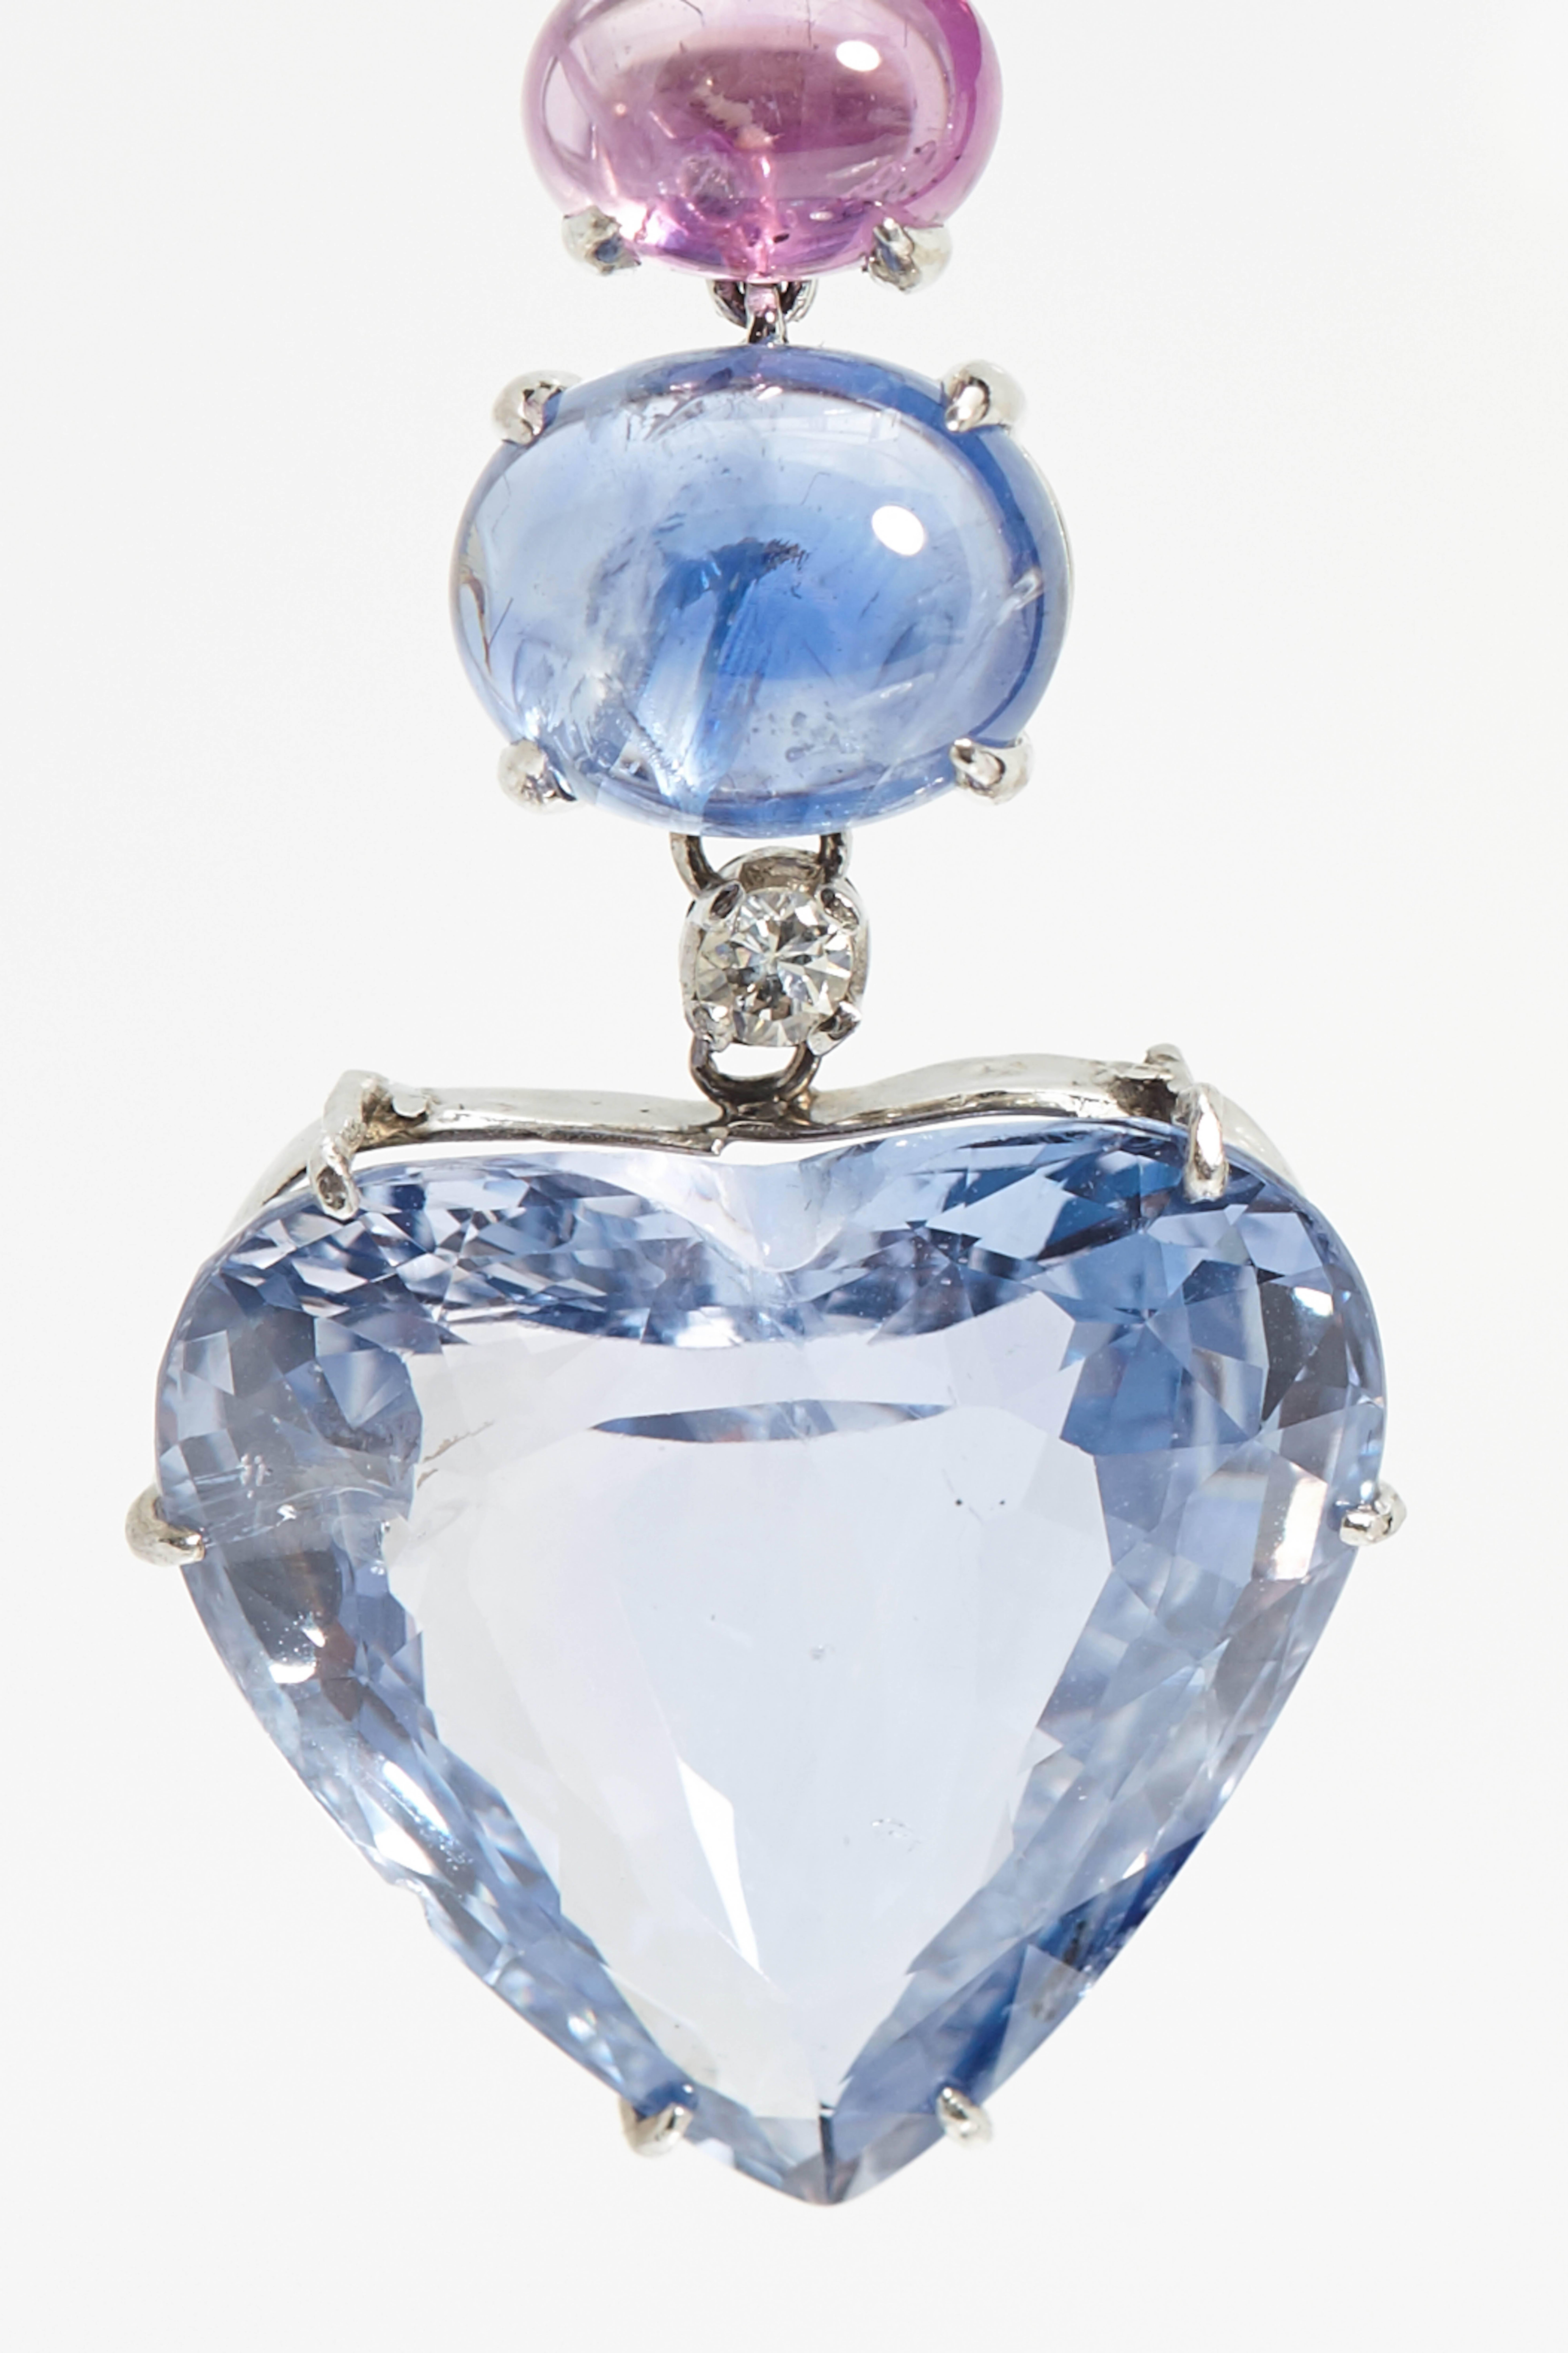 An impressive pair of ear pendants with kunzites (56 cts total) and blue sapphires (42 cts total), highlighted by two small brilliant cut diamonds, by Bulgari. Mounted on 18kt white gold. Made in Italy, circa 1975.